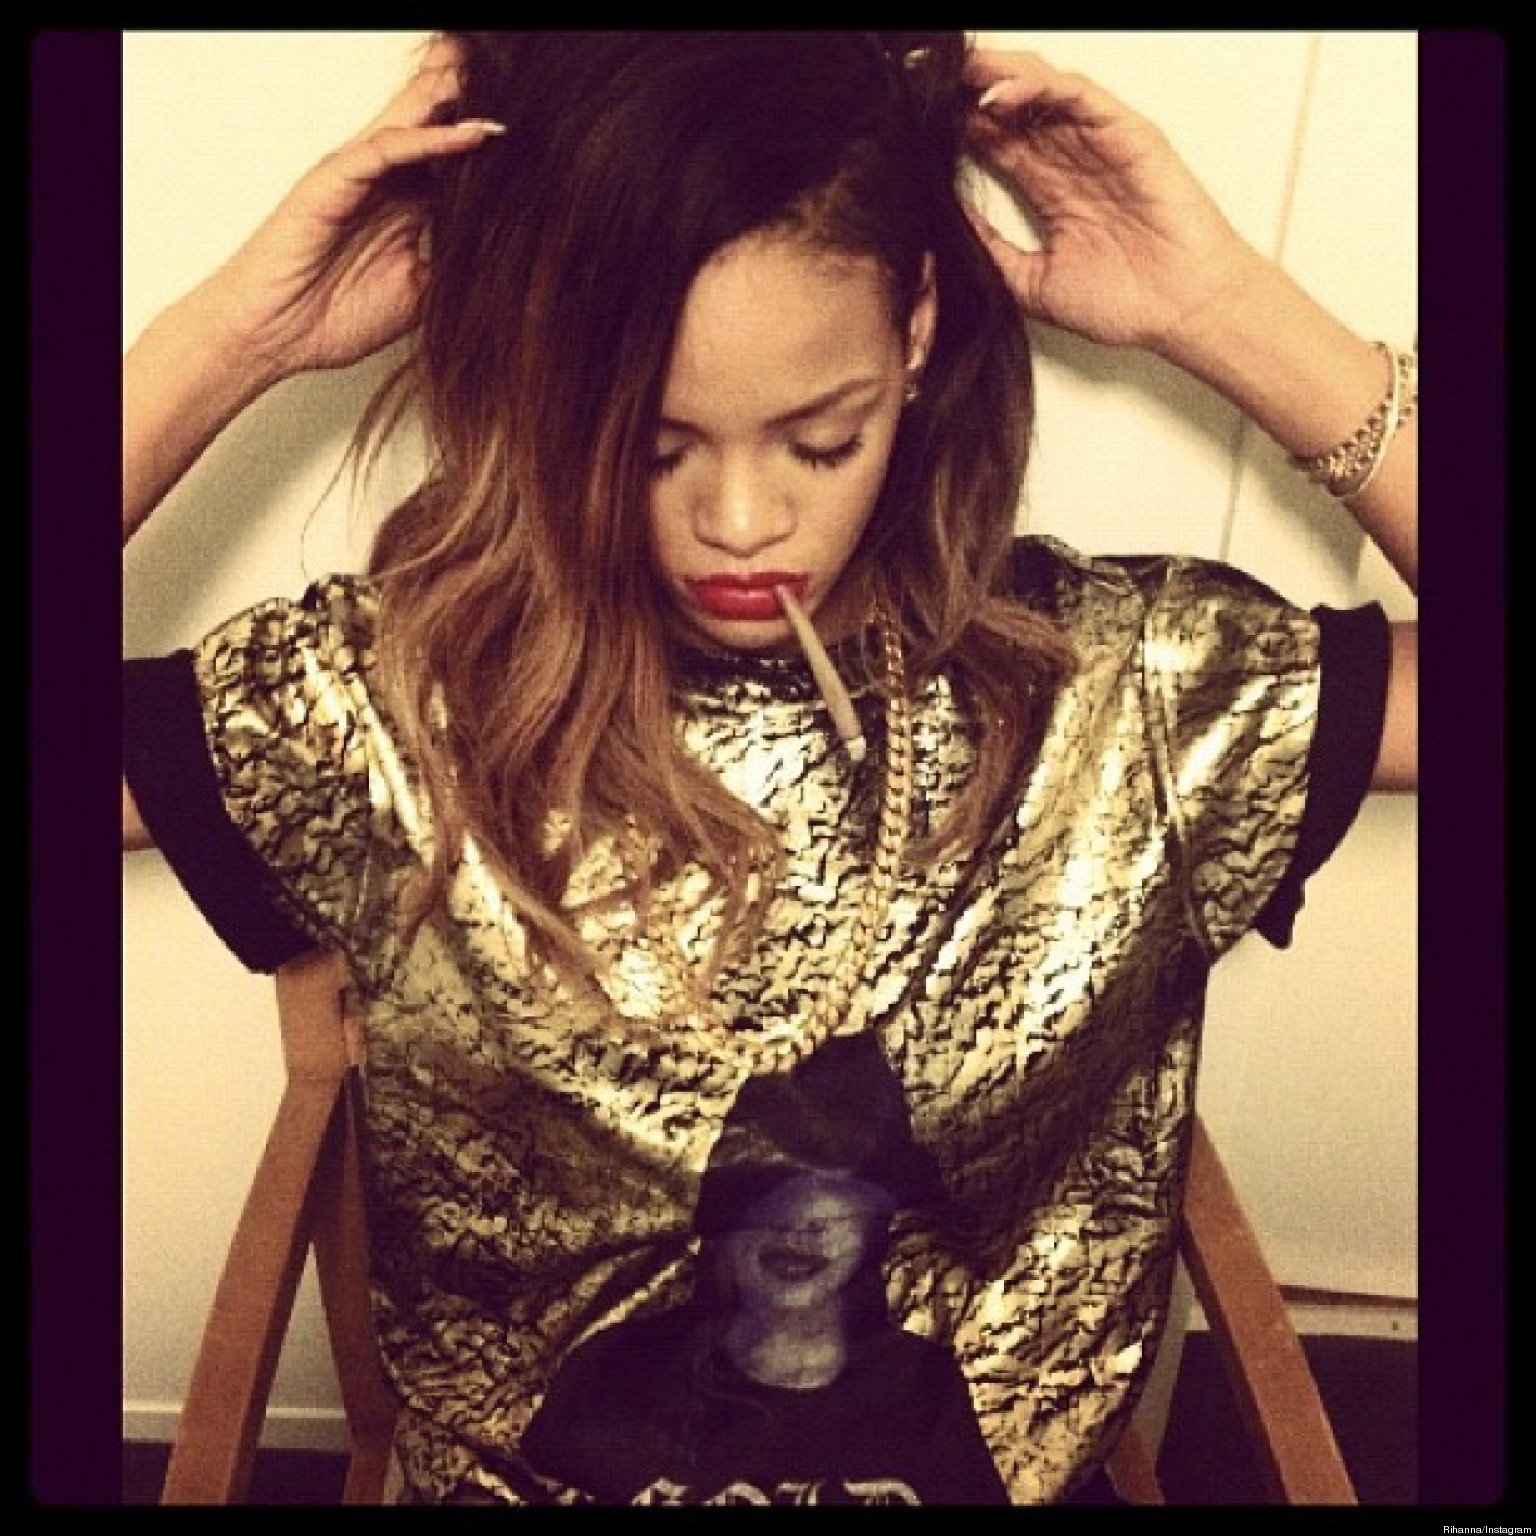 Rihanna's Smoking Photo On Instagram Is More Of The Same (PHOTO) | HuffPost1536 x 1536